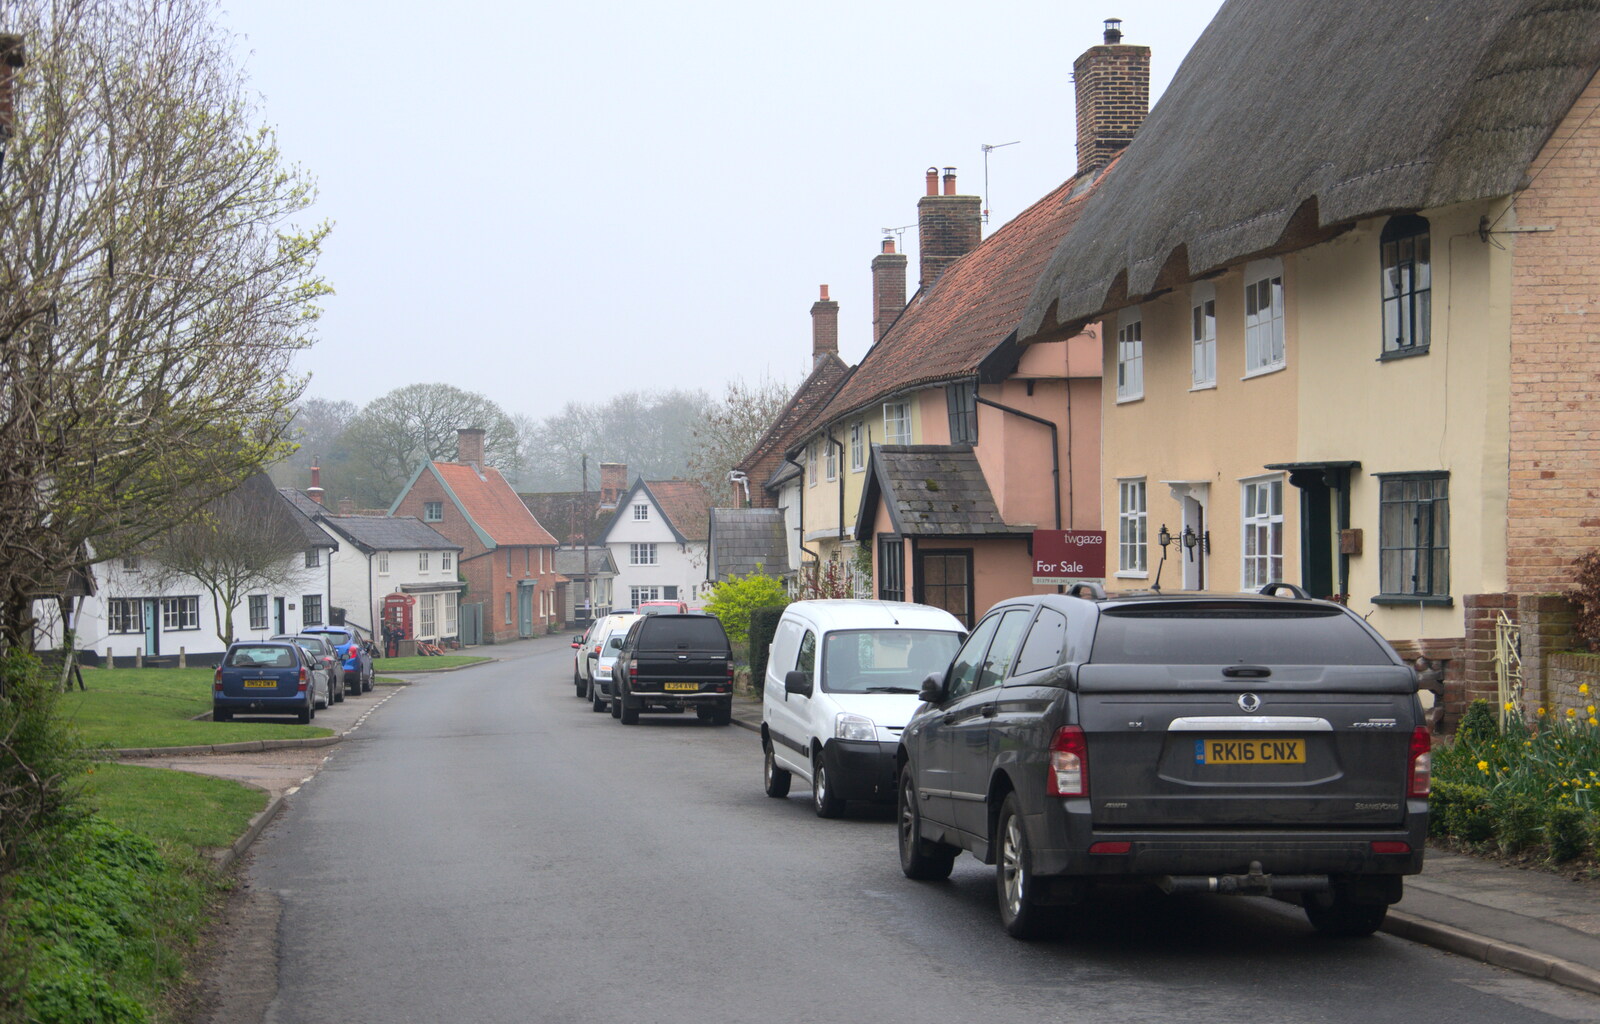 The Street in Hoxne from On The Beach, Southwold, Suffolk - 7th April 2019